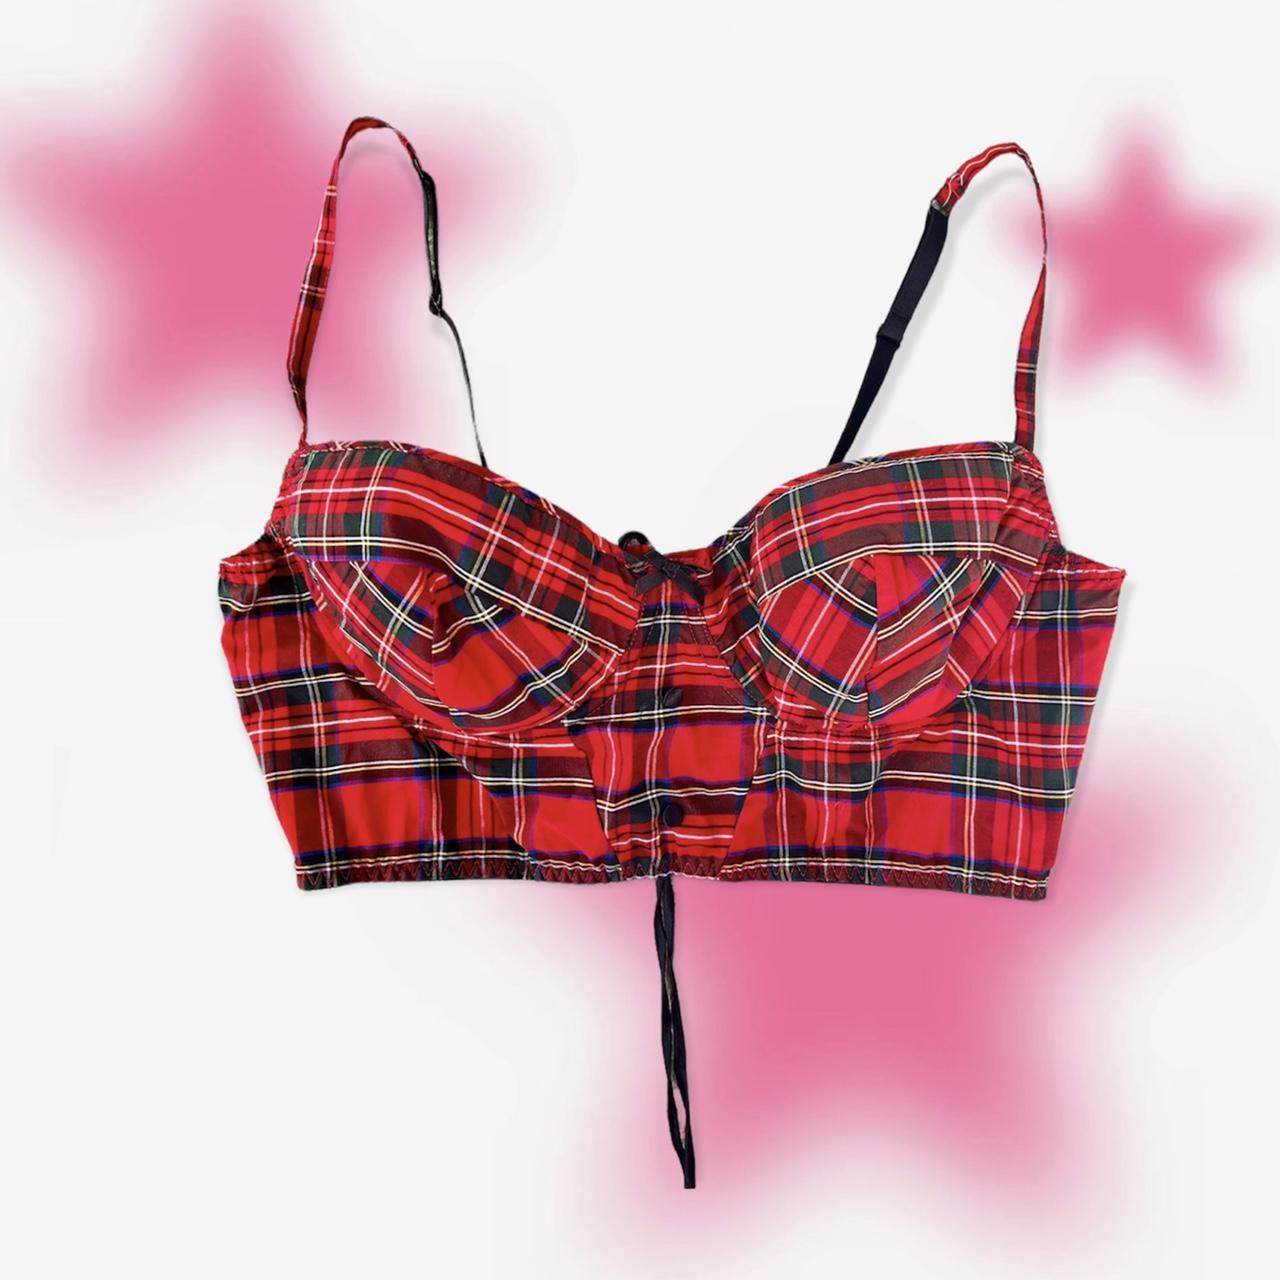 Product Image 1 - fredericks of hollywood corset
plaid red